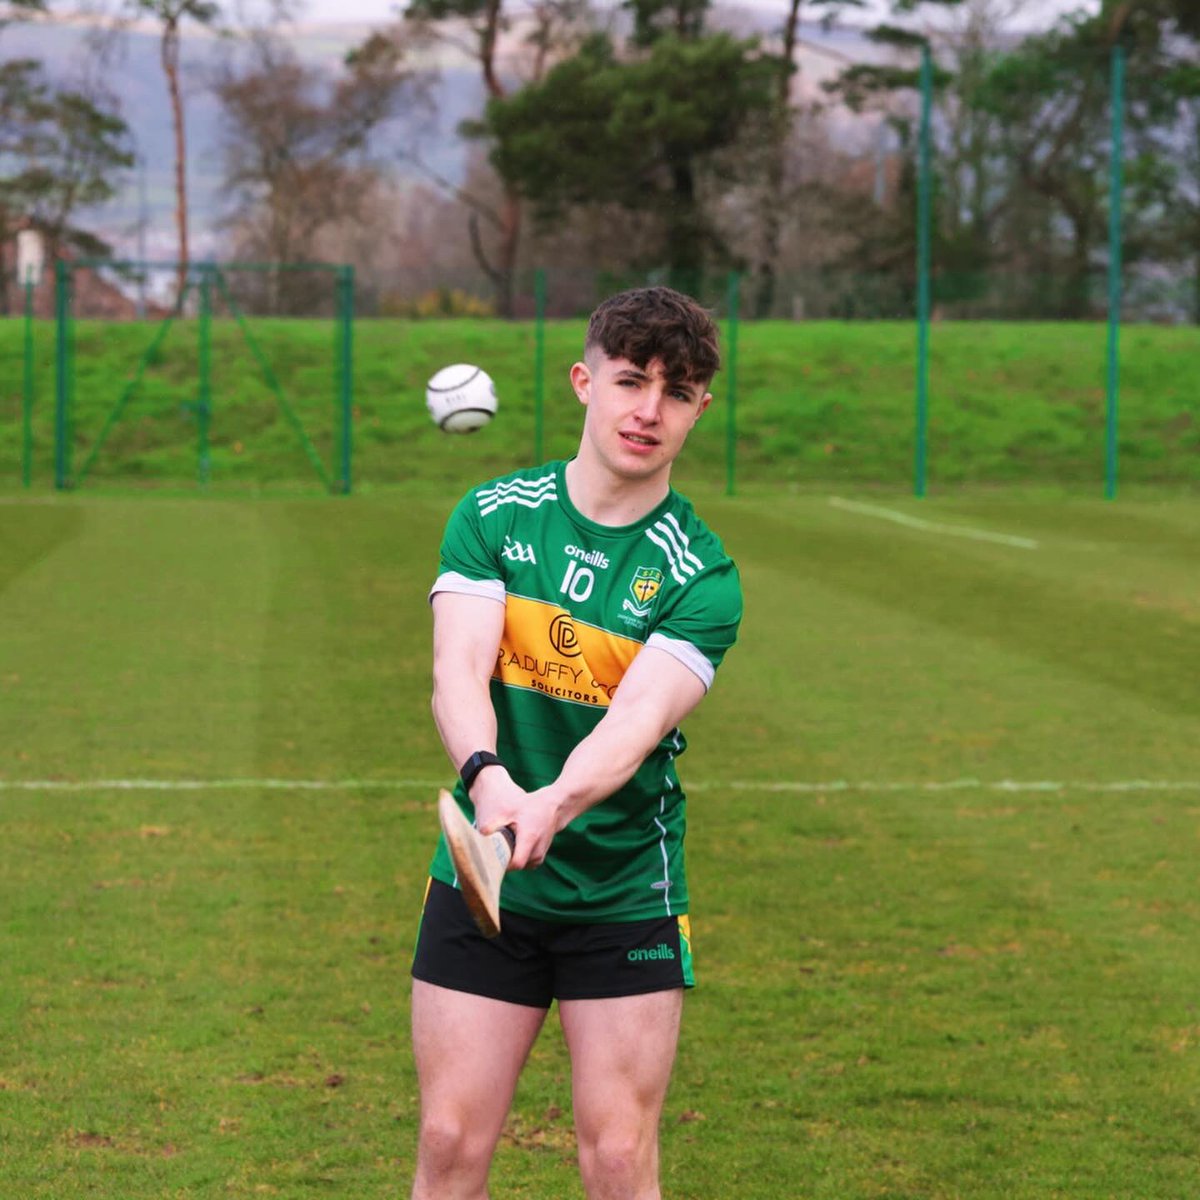 🏆🎉 Introducing Leo: Our First-Ever GAA Hurling All Star! 🌟🏑 Leo has shown immense dedication to school hurling since Year 8, and his talent shines bright. He's a humble and modest dual star, truly deserving of this achievement. Well done, Leo! 👏 #GAAHurlingAllStar #Proud